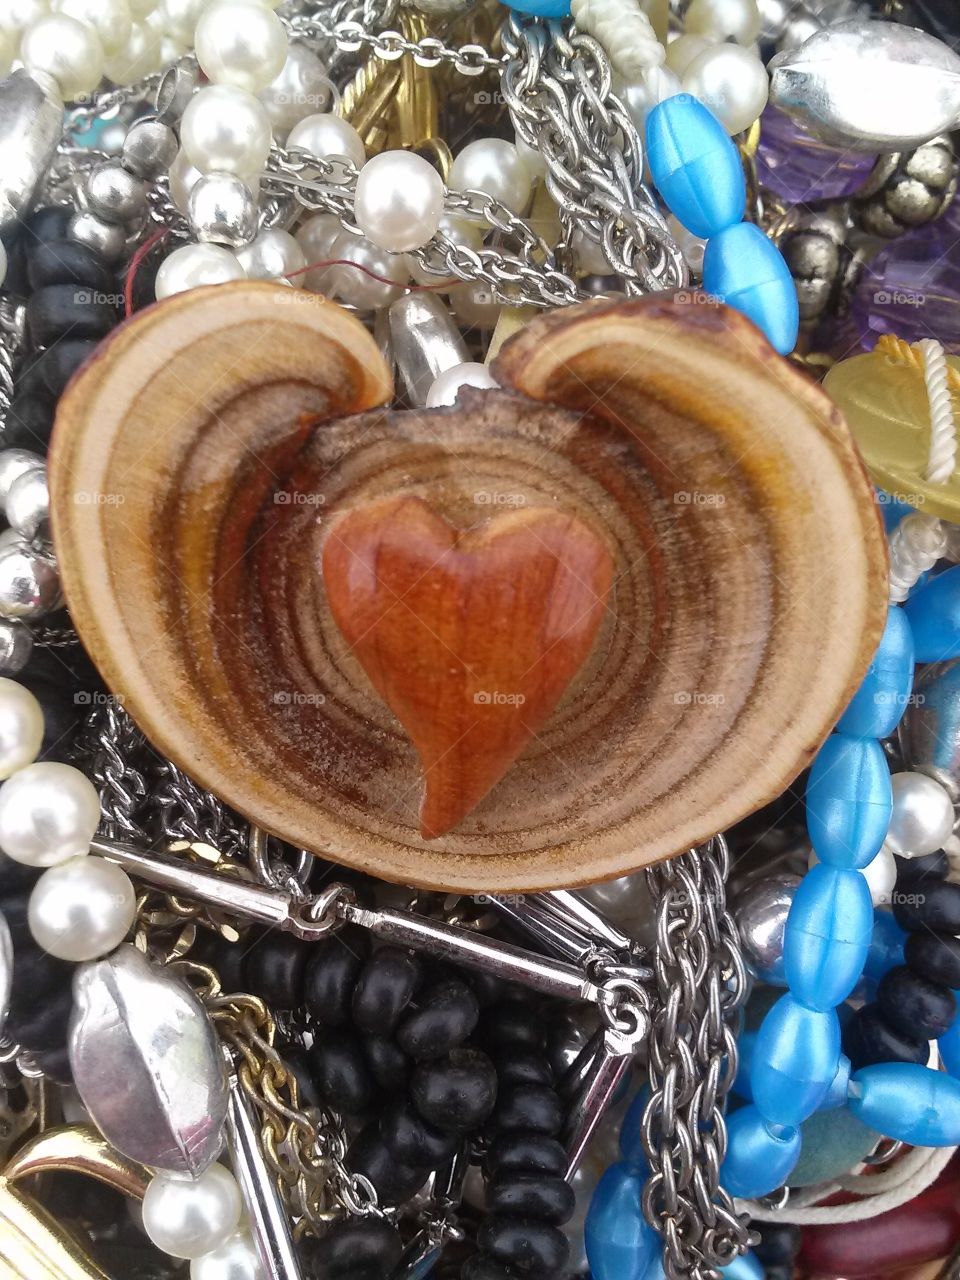 heart wood. wood carving with a heart broach